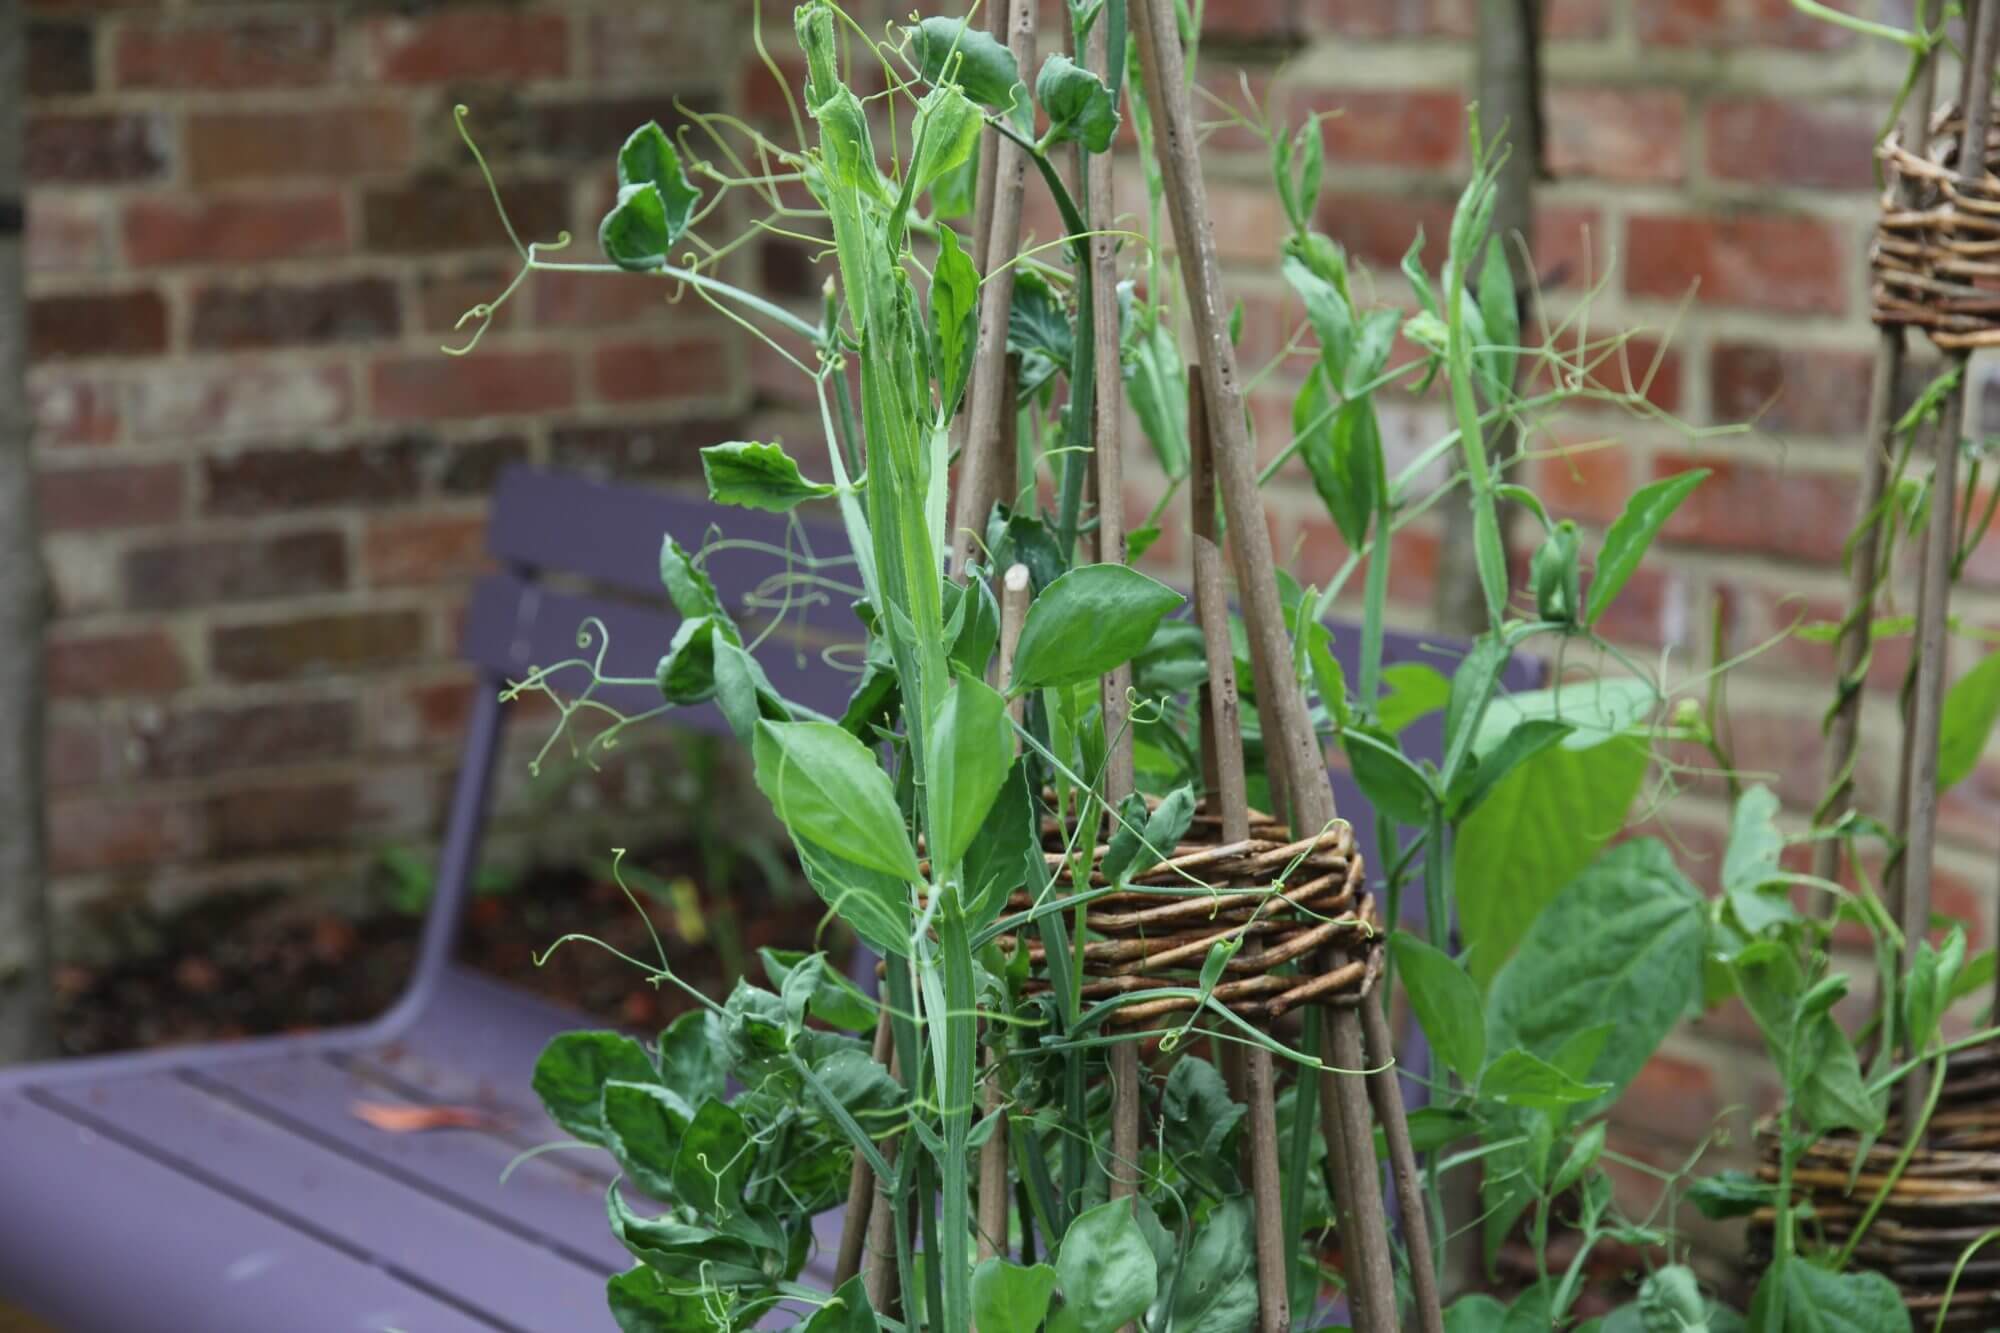 Sweet peas climbing up woven willow tripods